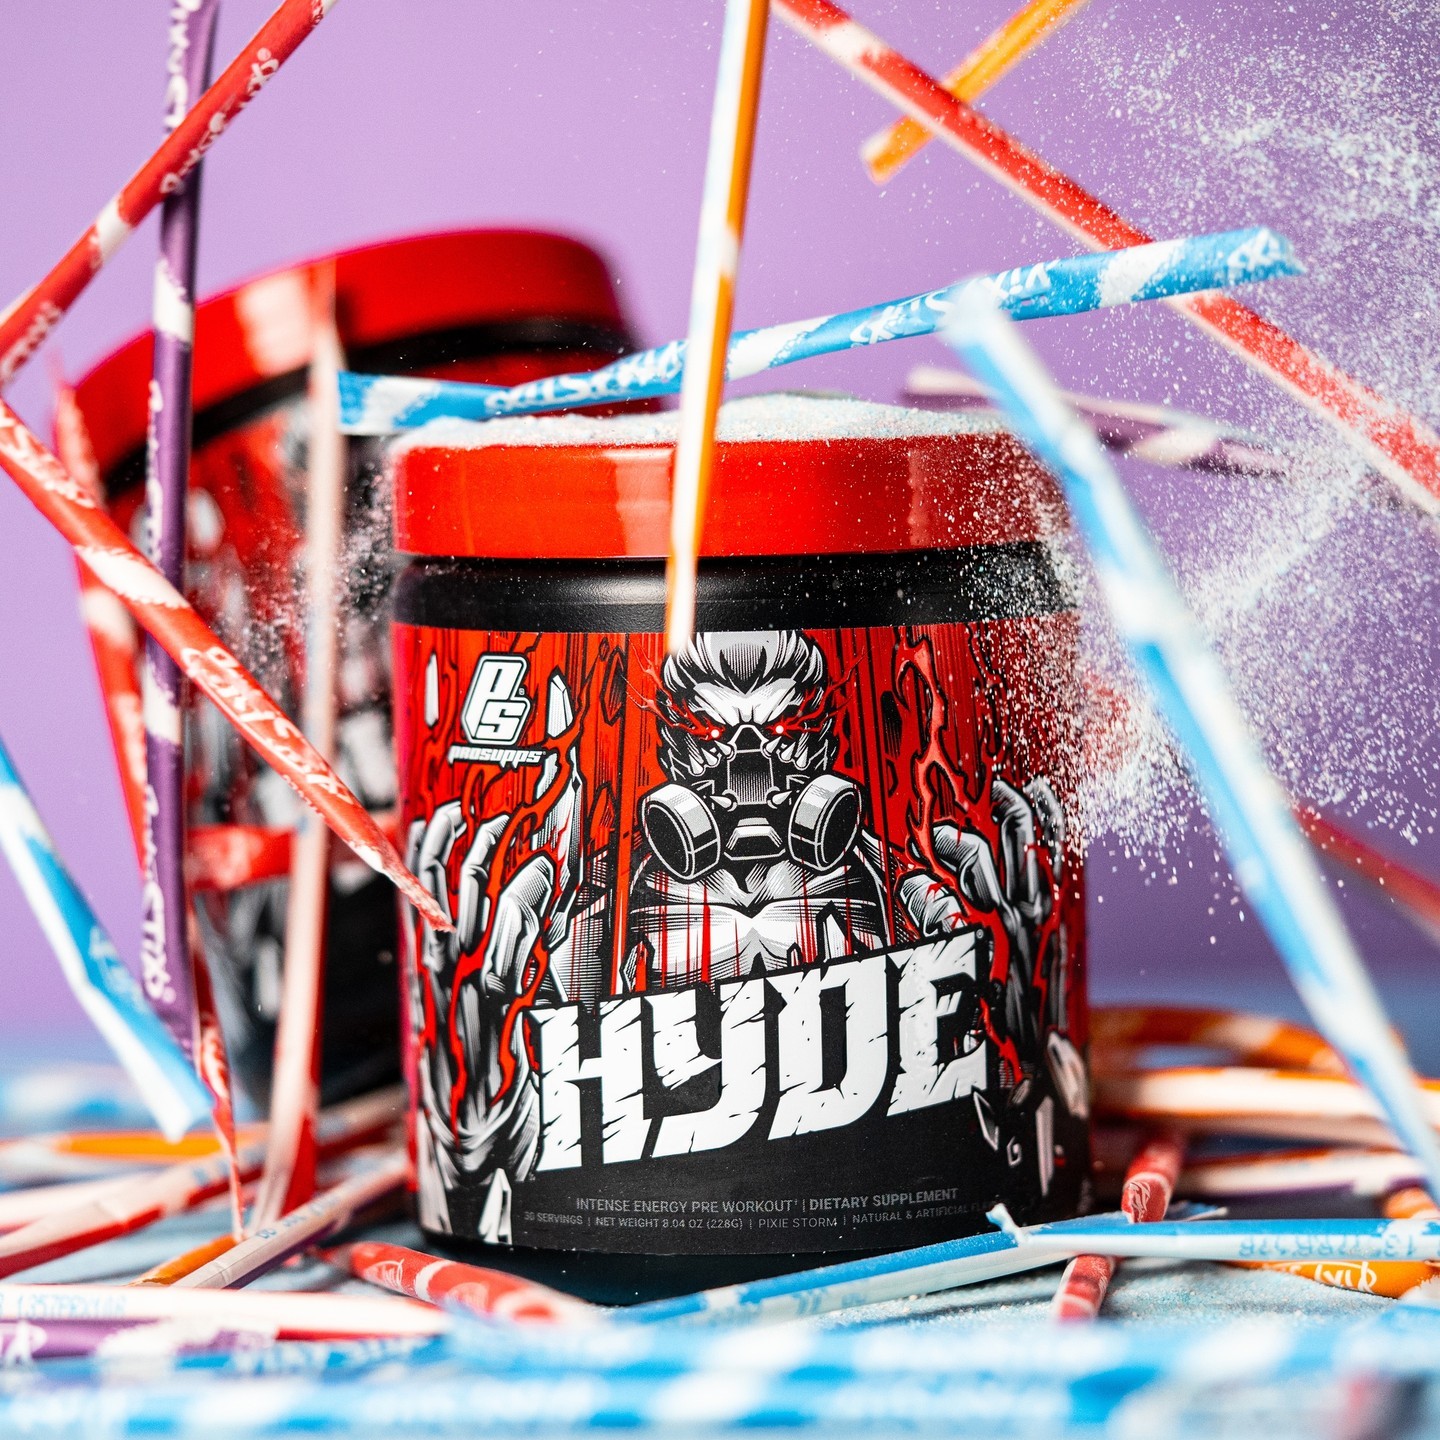 ProSupps Hyde Pixie Storm flavor